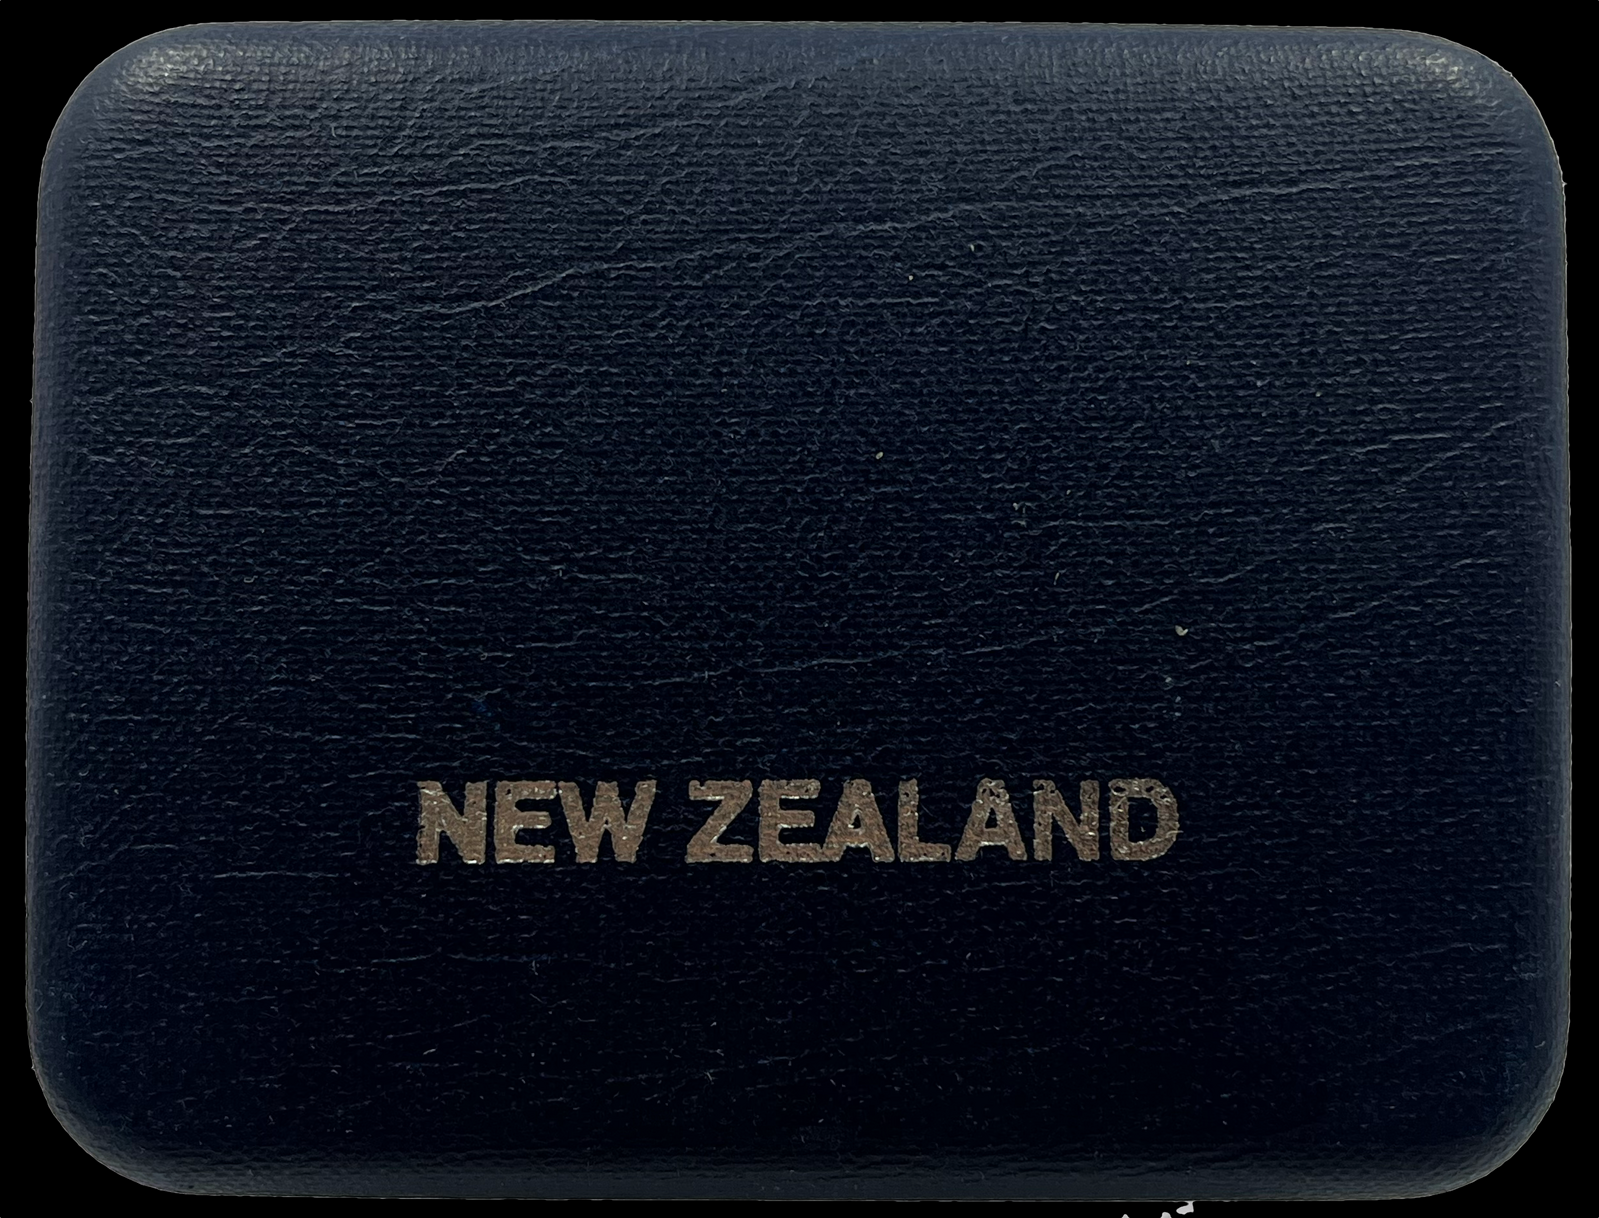 New Zealand 1979 One Dollar Silver Proof Coin product image